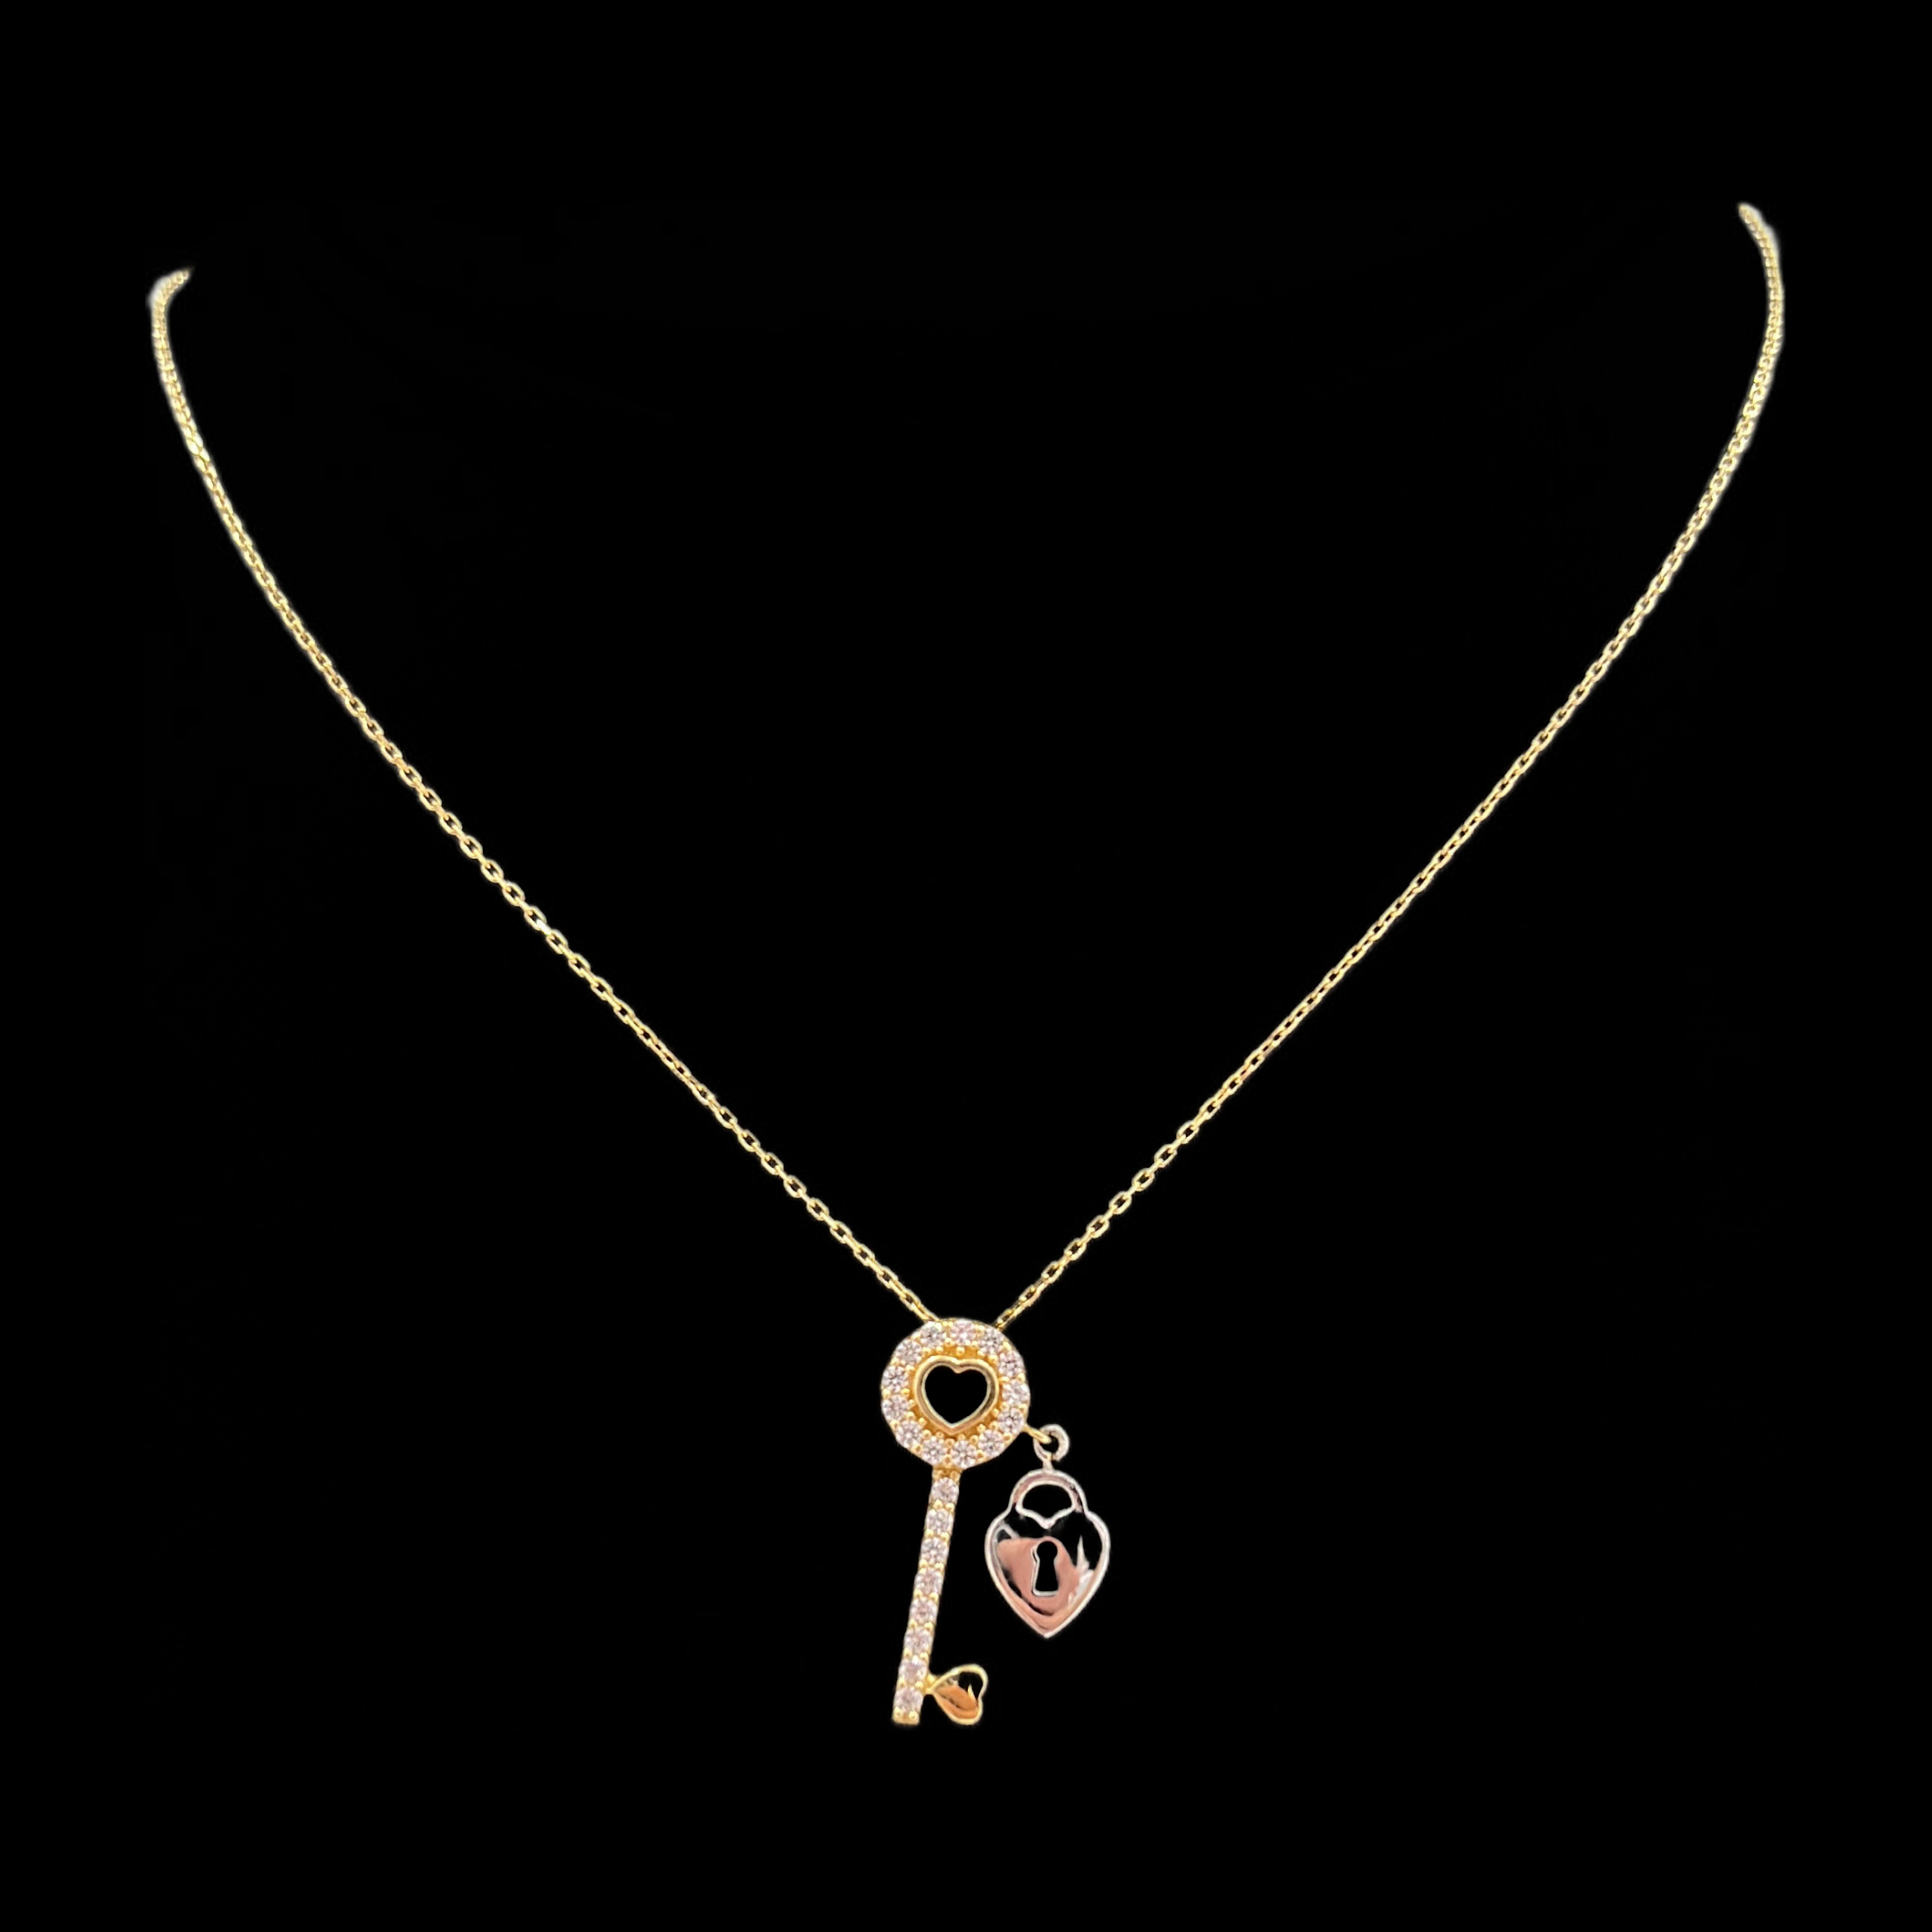 Lock and Key Women's Necklace